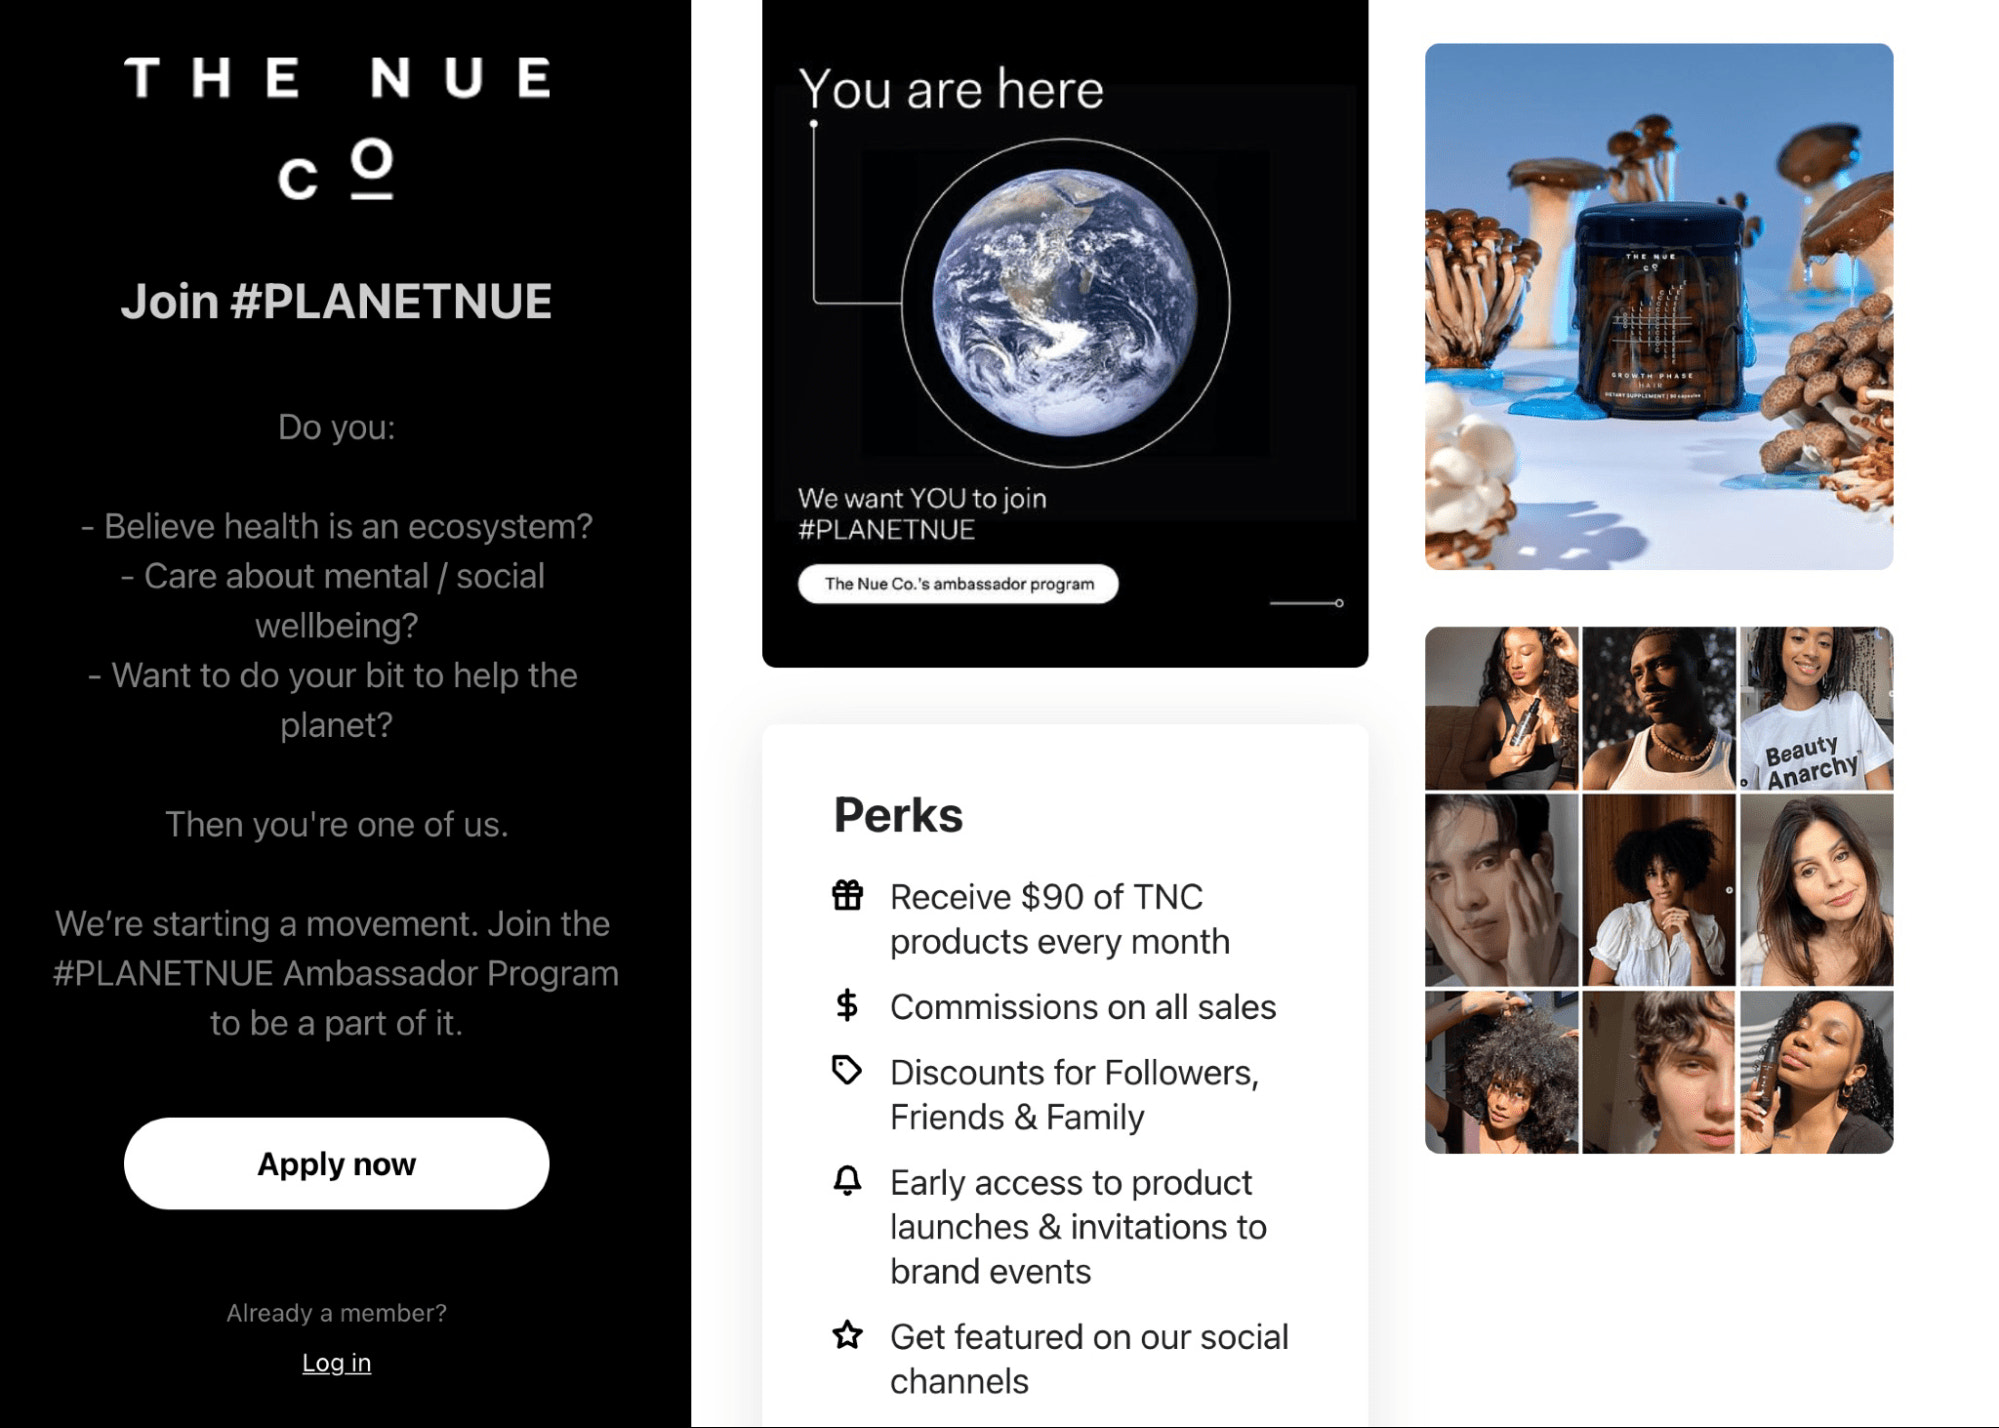 A screenshot of The Nue Co. ambassador program, which invites customer evangelists to earn rewards for sharing the brand